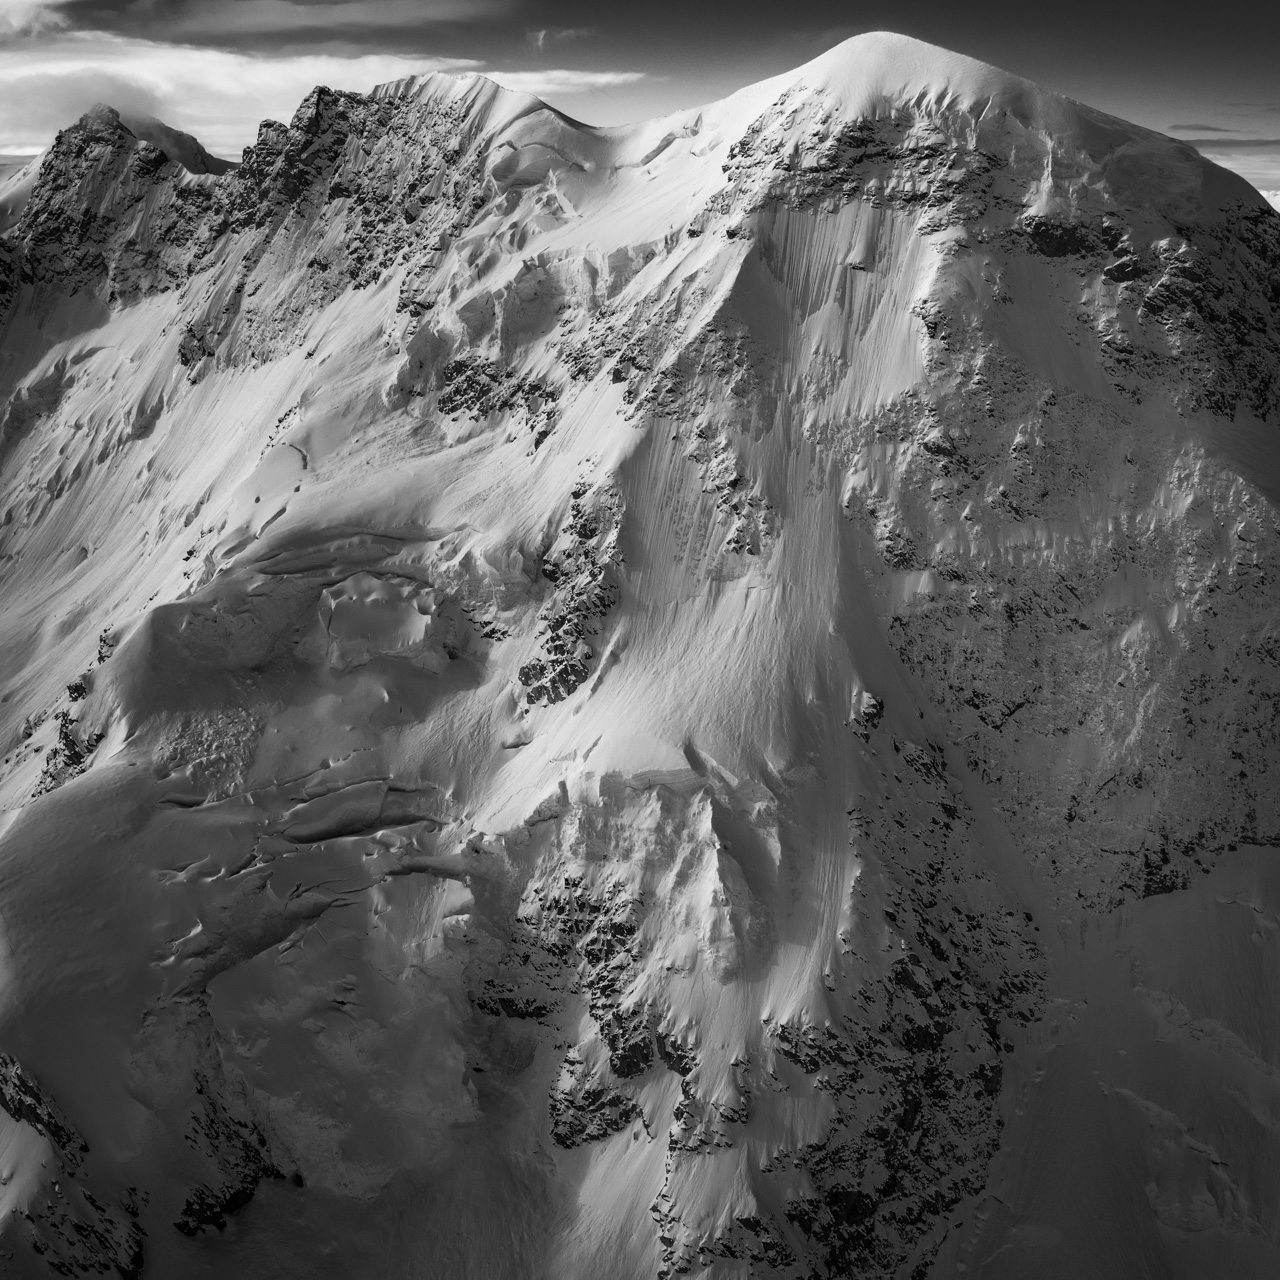 Breithorn - black and white images of the mountains Alps of Zermatt